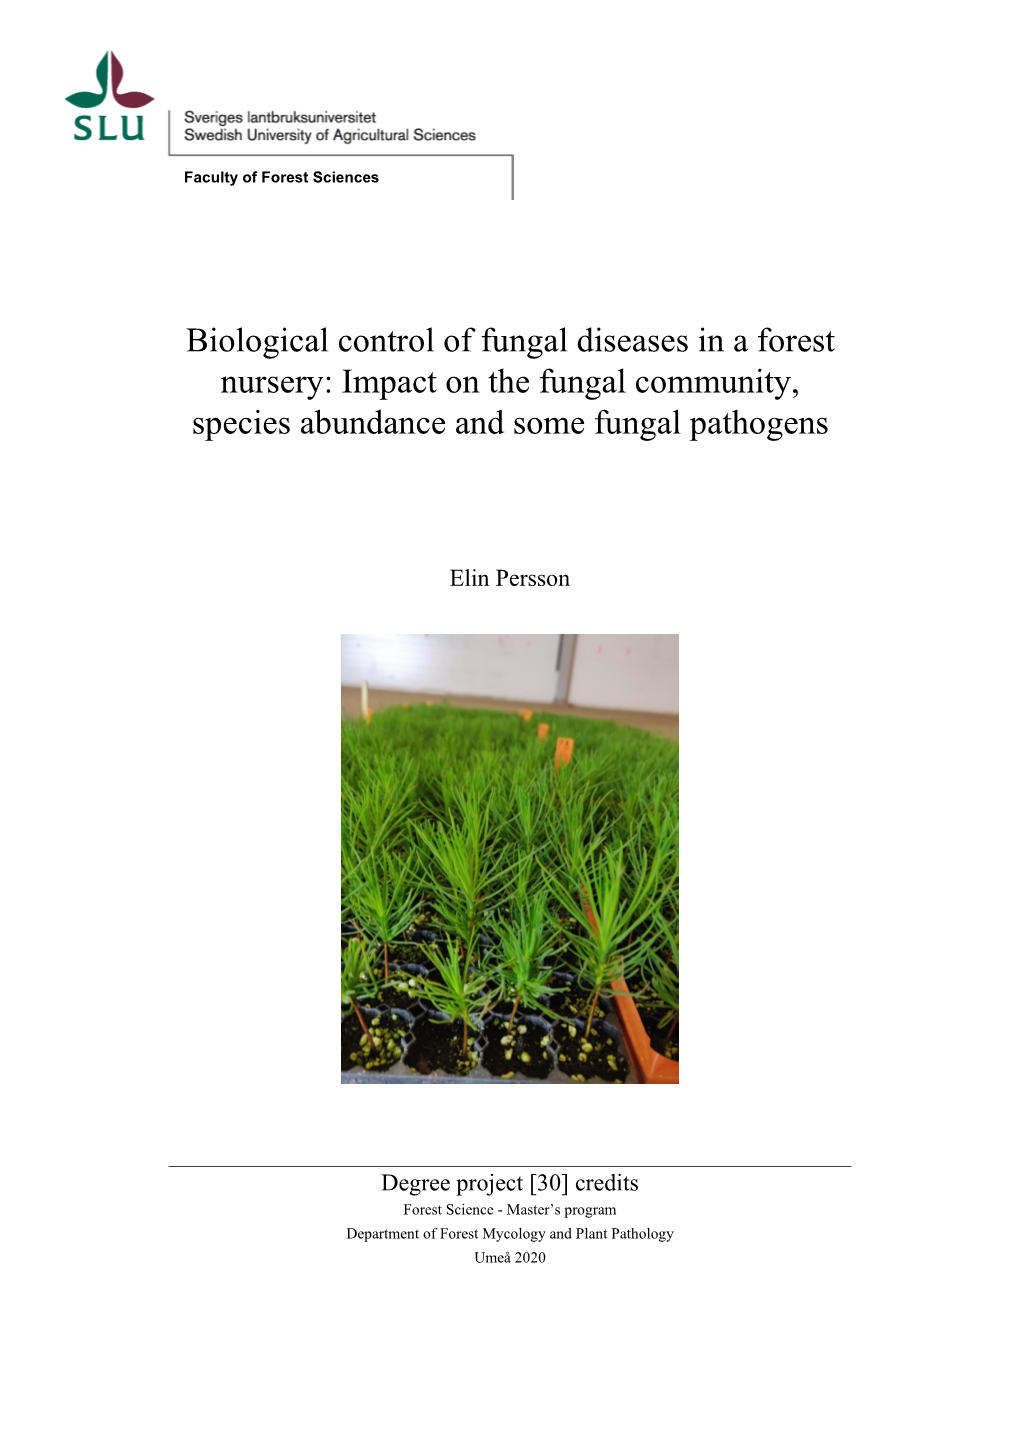 Biological Control of Fungal Diseases in a Forest Nursery: Impact on the Fungal Community, Species Abundance and Some Fungal Pathogens